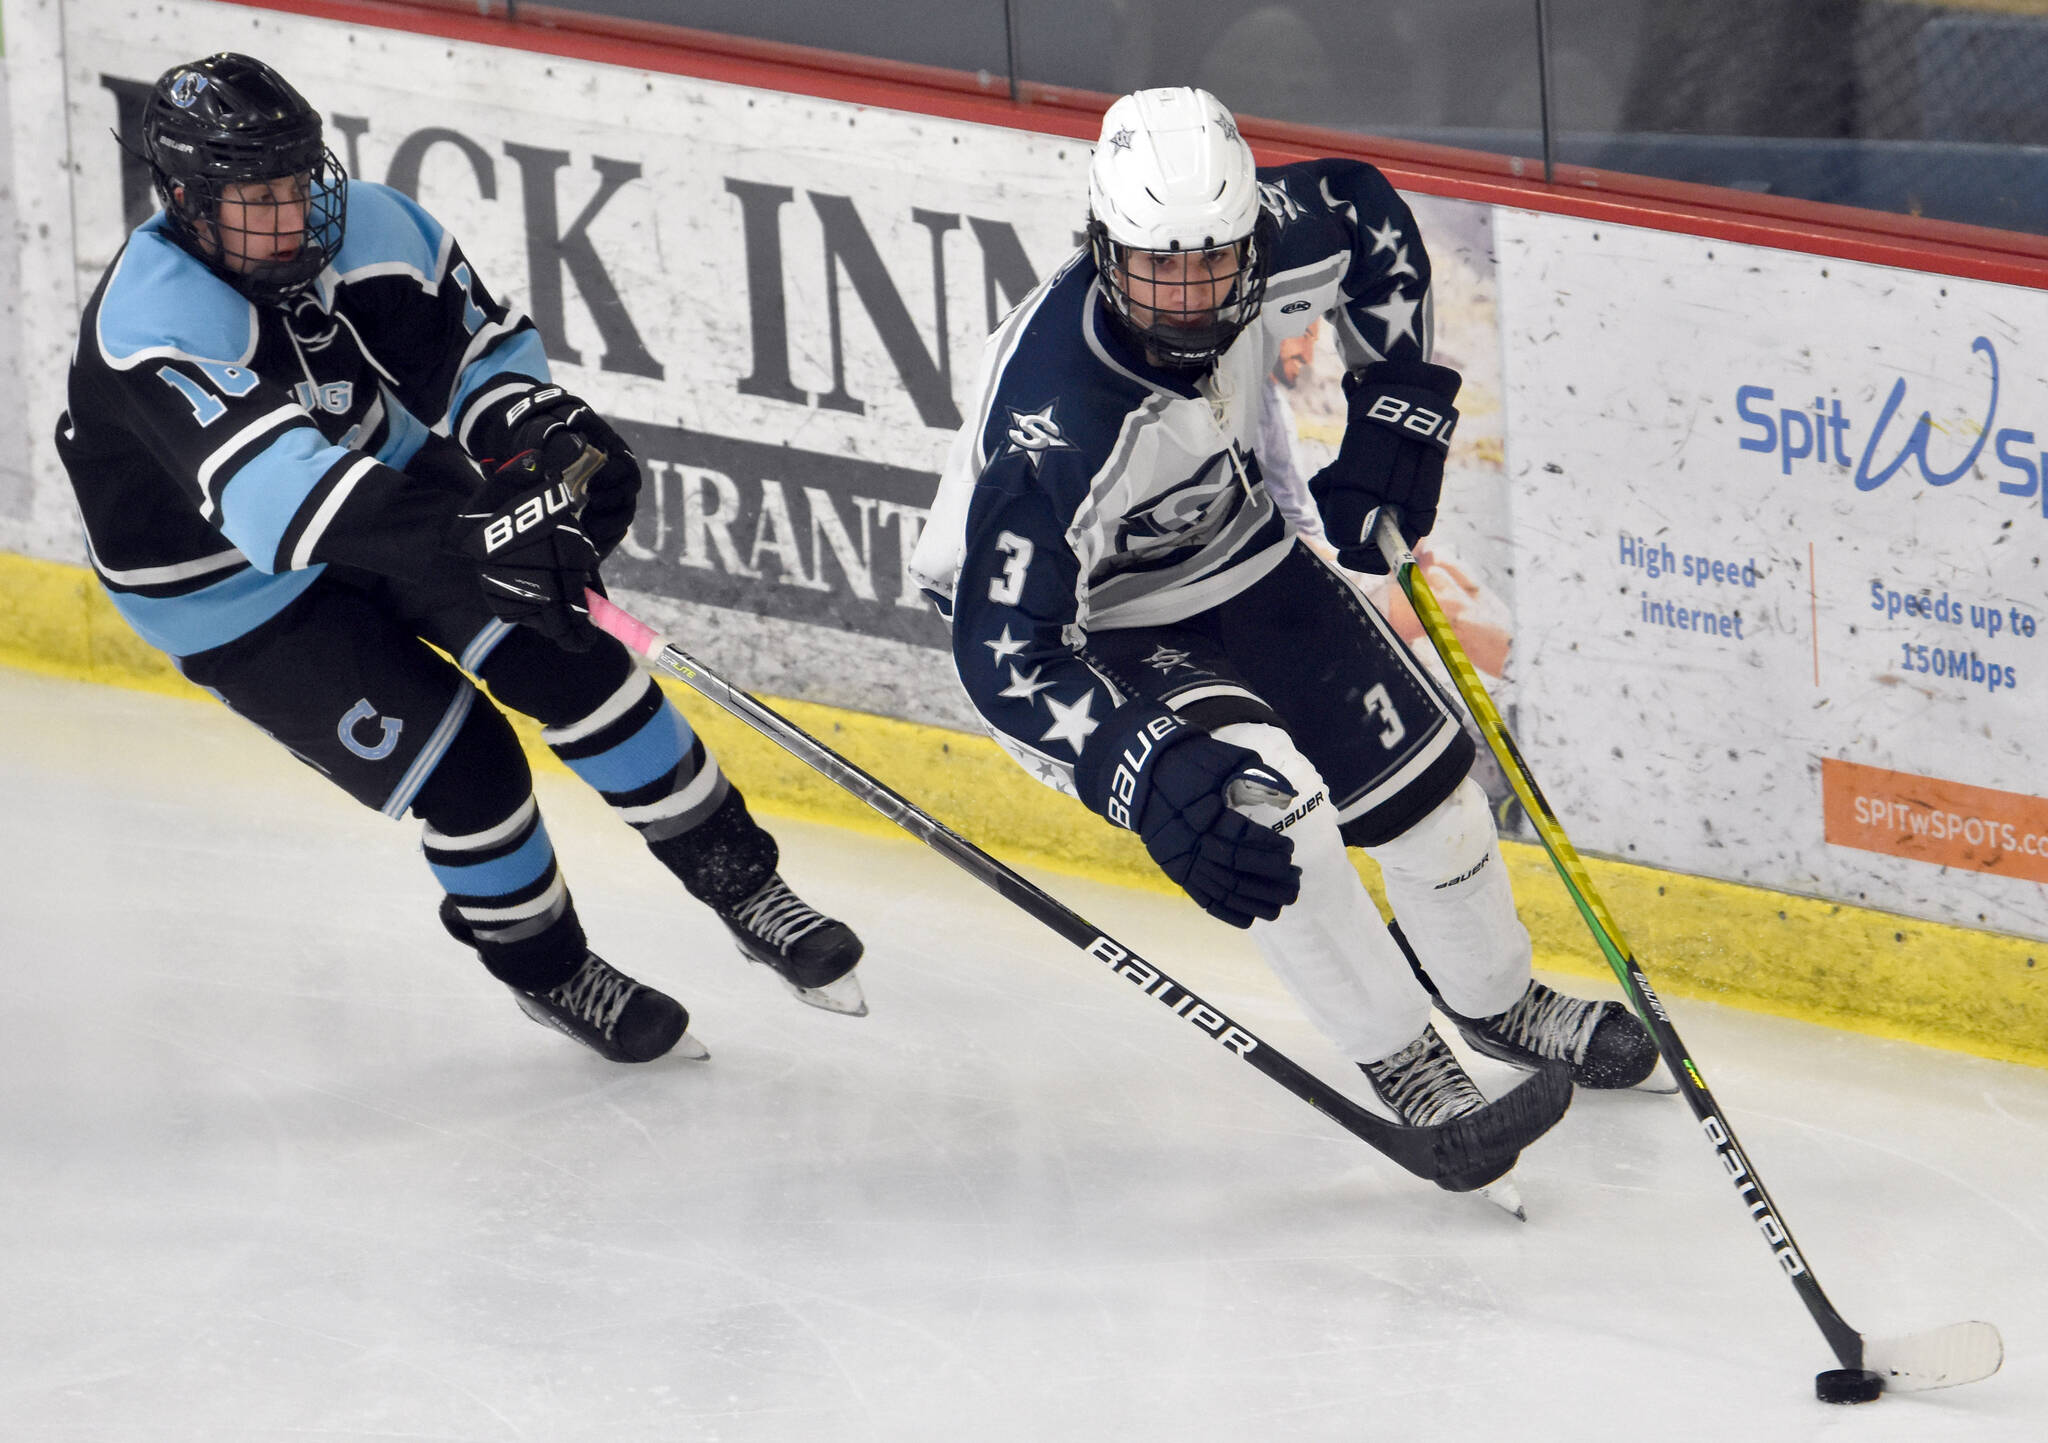 Soldotna’s Andrew Arthur brings the puck out from behind the net under pressure from Chugiak’s Shayden Davis on Friday, Nov. 18, 2022, at the Soldotna Regional Sports Complex in Soldotna, Alaska. (Photo by Jeff Helminiak/Peninsula Clarion)